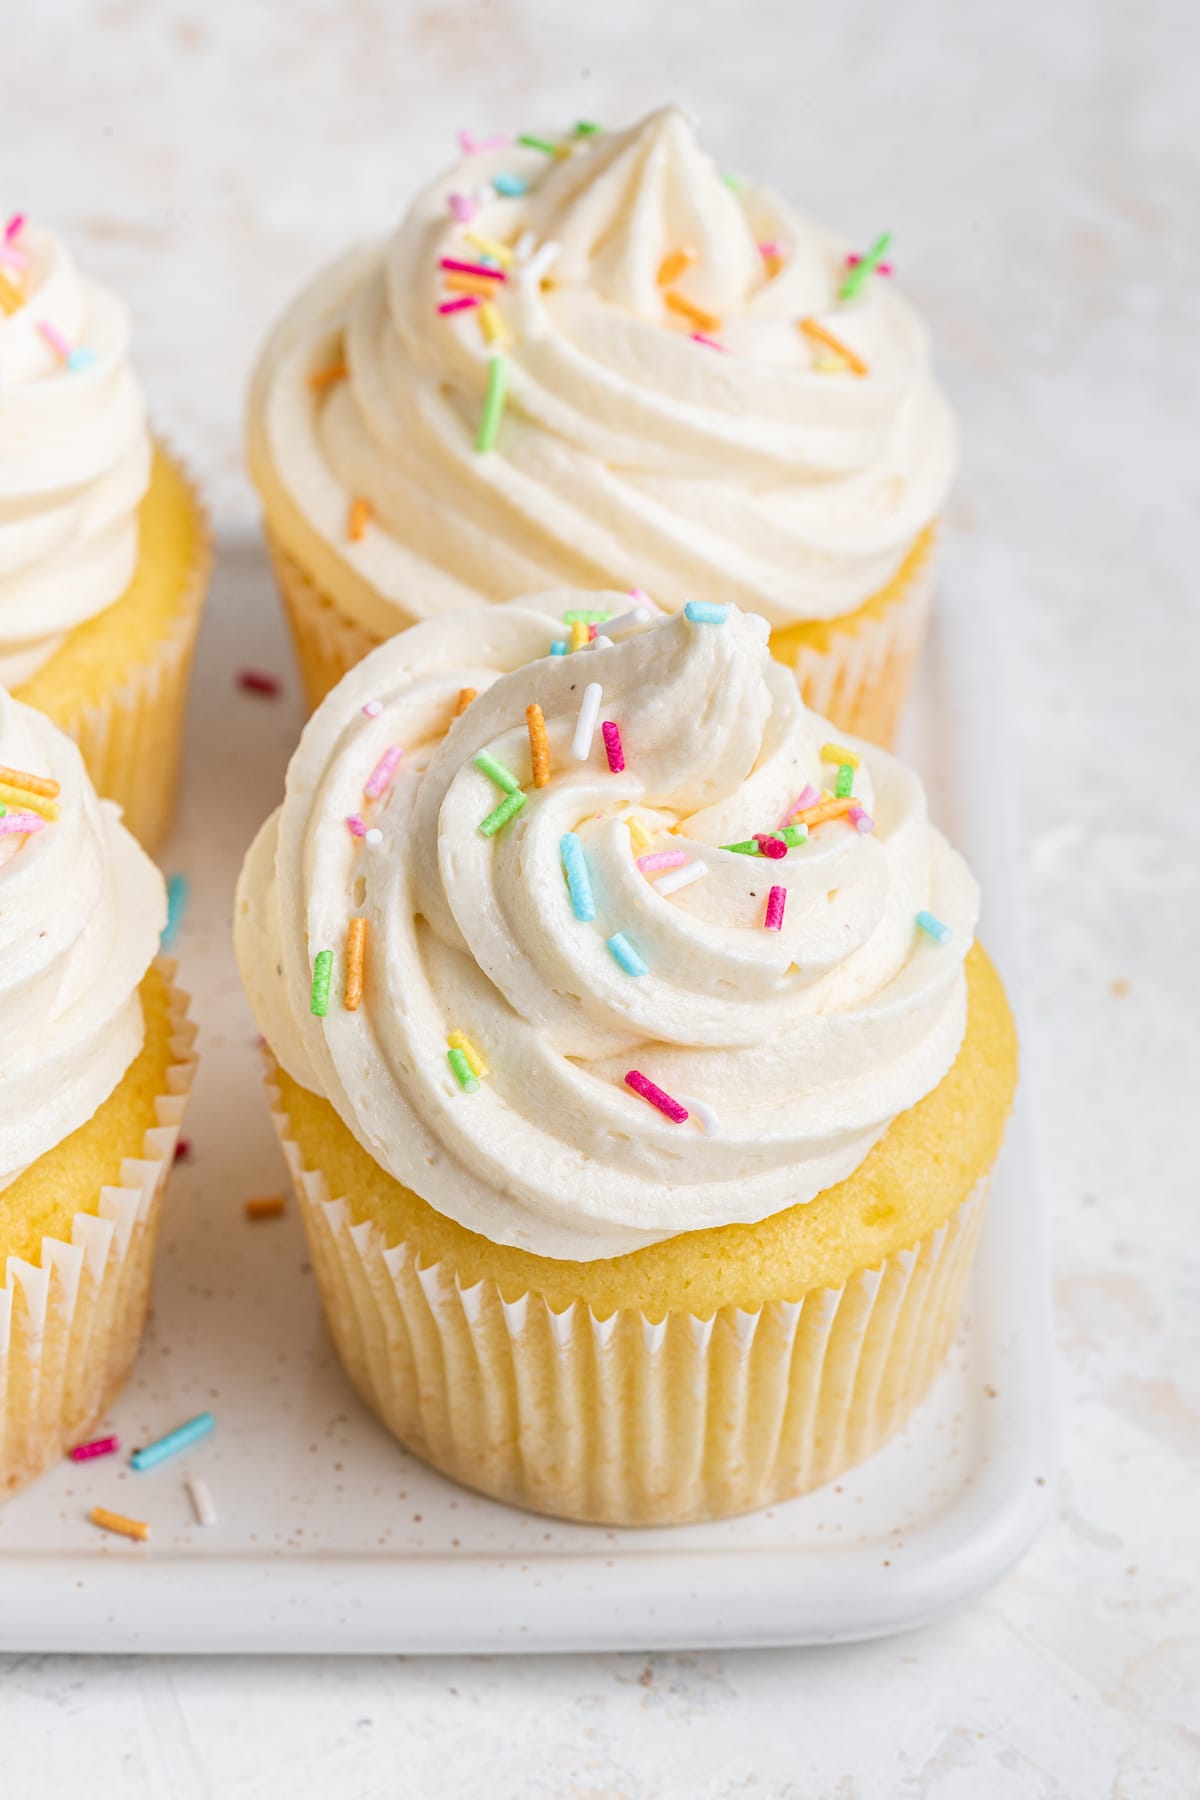 Cupcakes with vanilla buttercream frosting and sprinkles on top.